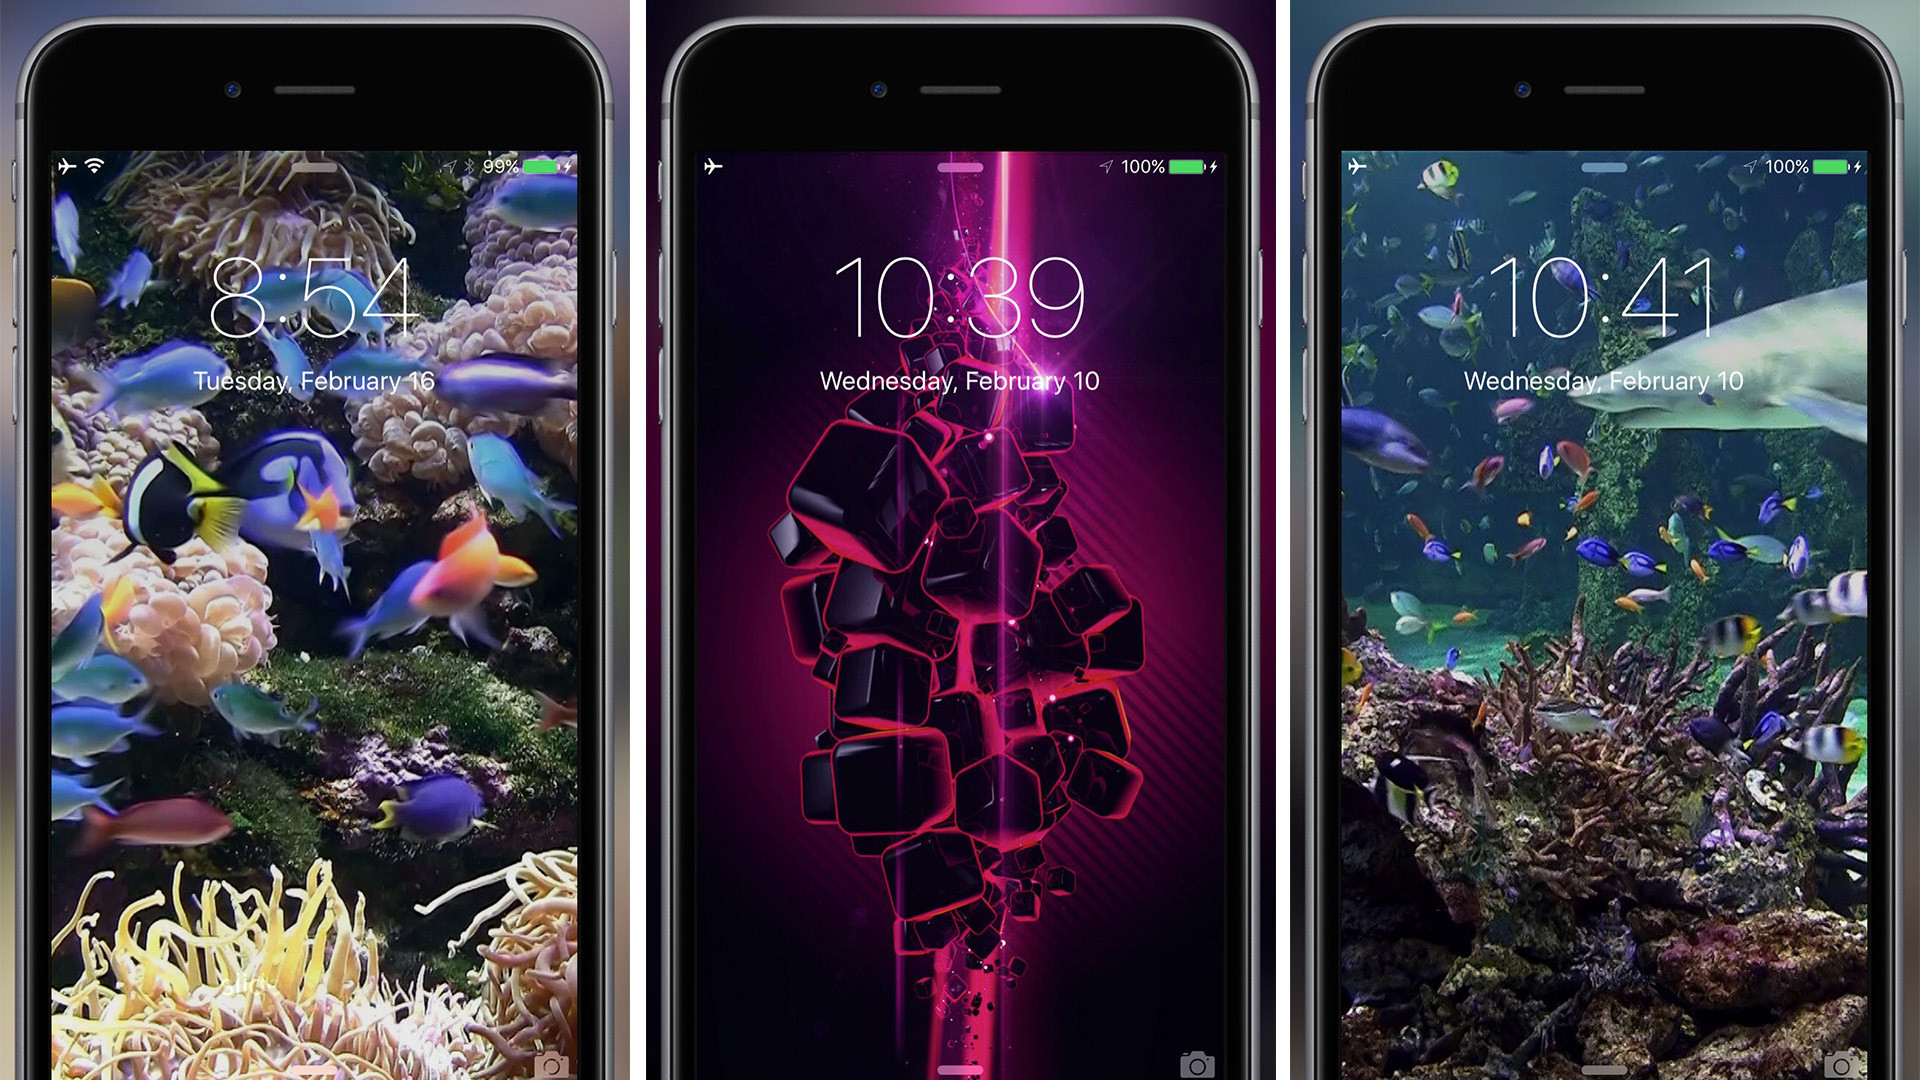 Best Live Wallpaper Apps For Iphone X, Iphone 8, And - Live Wallpaper For Iphone X - HD Wallpaper 